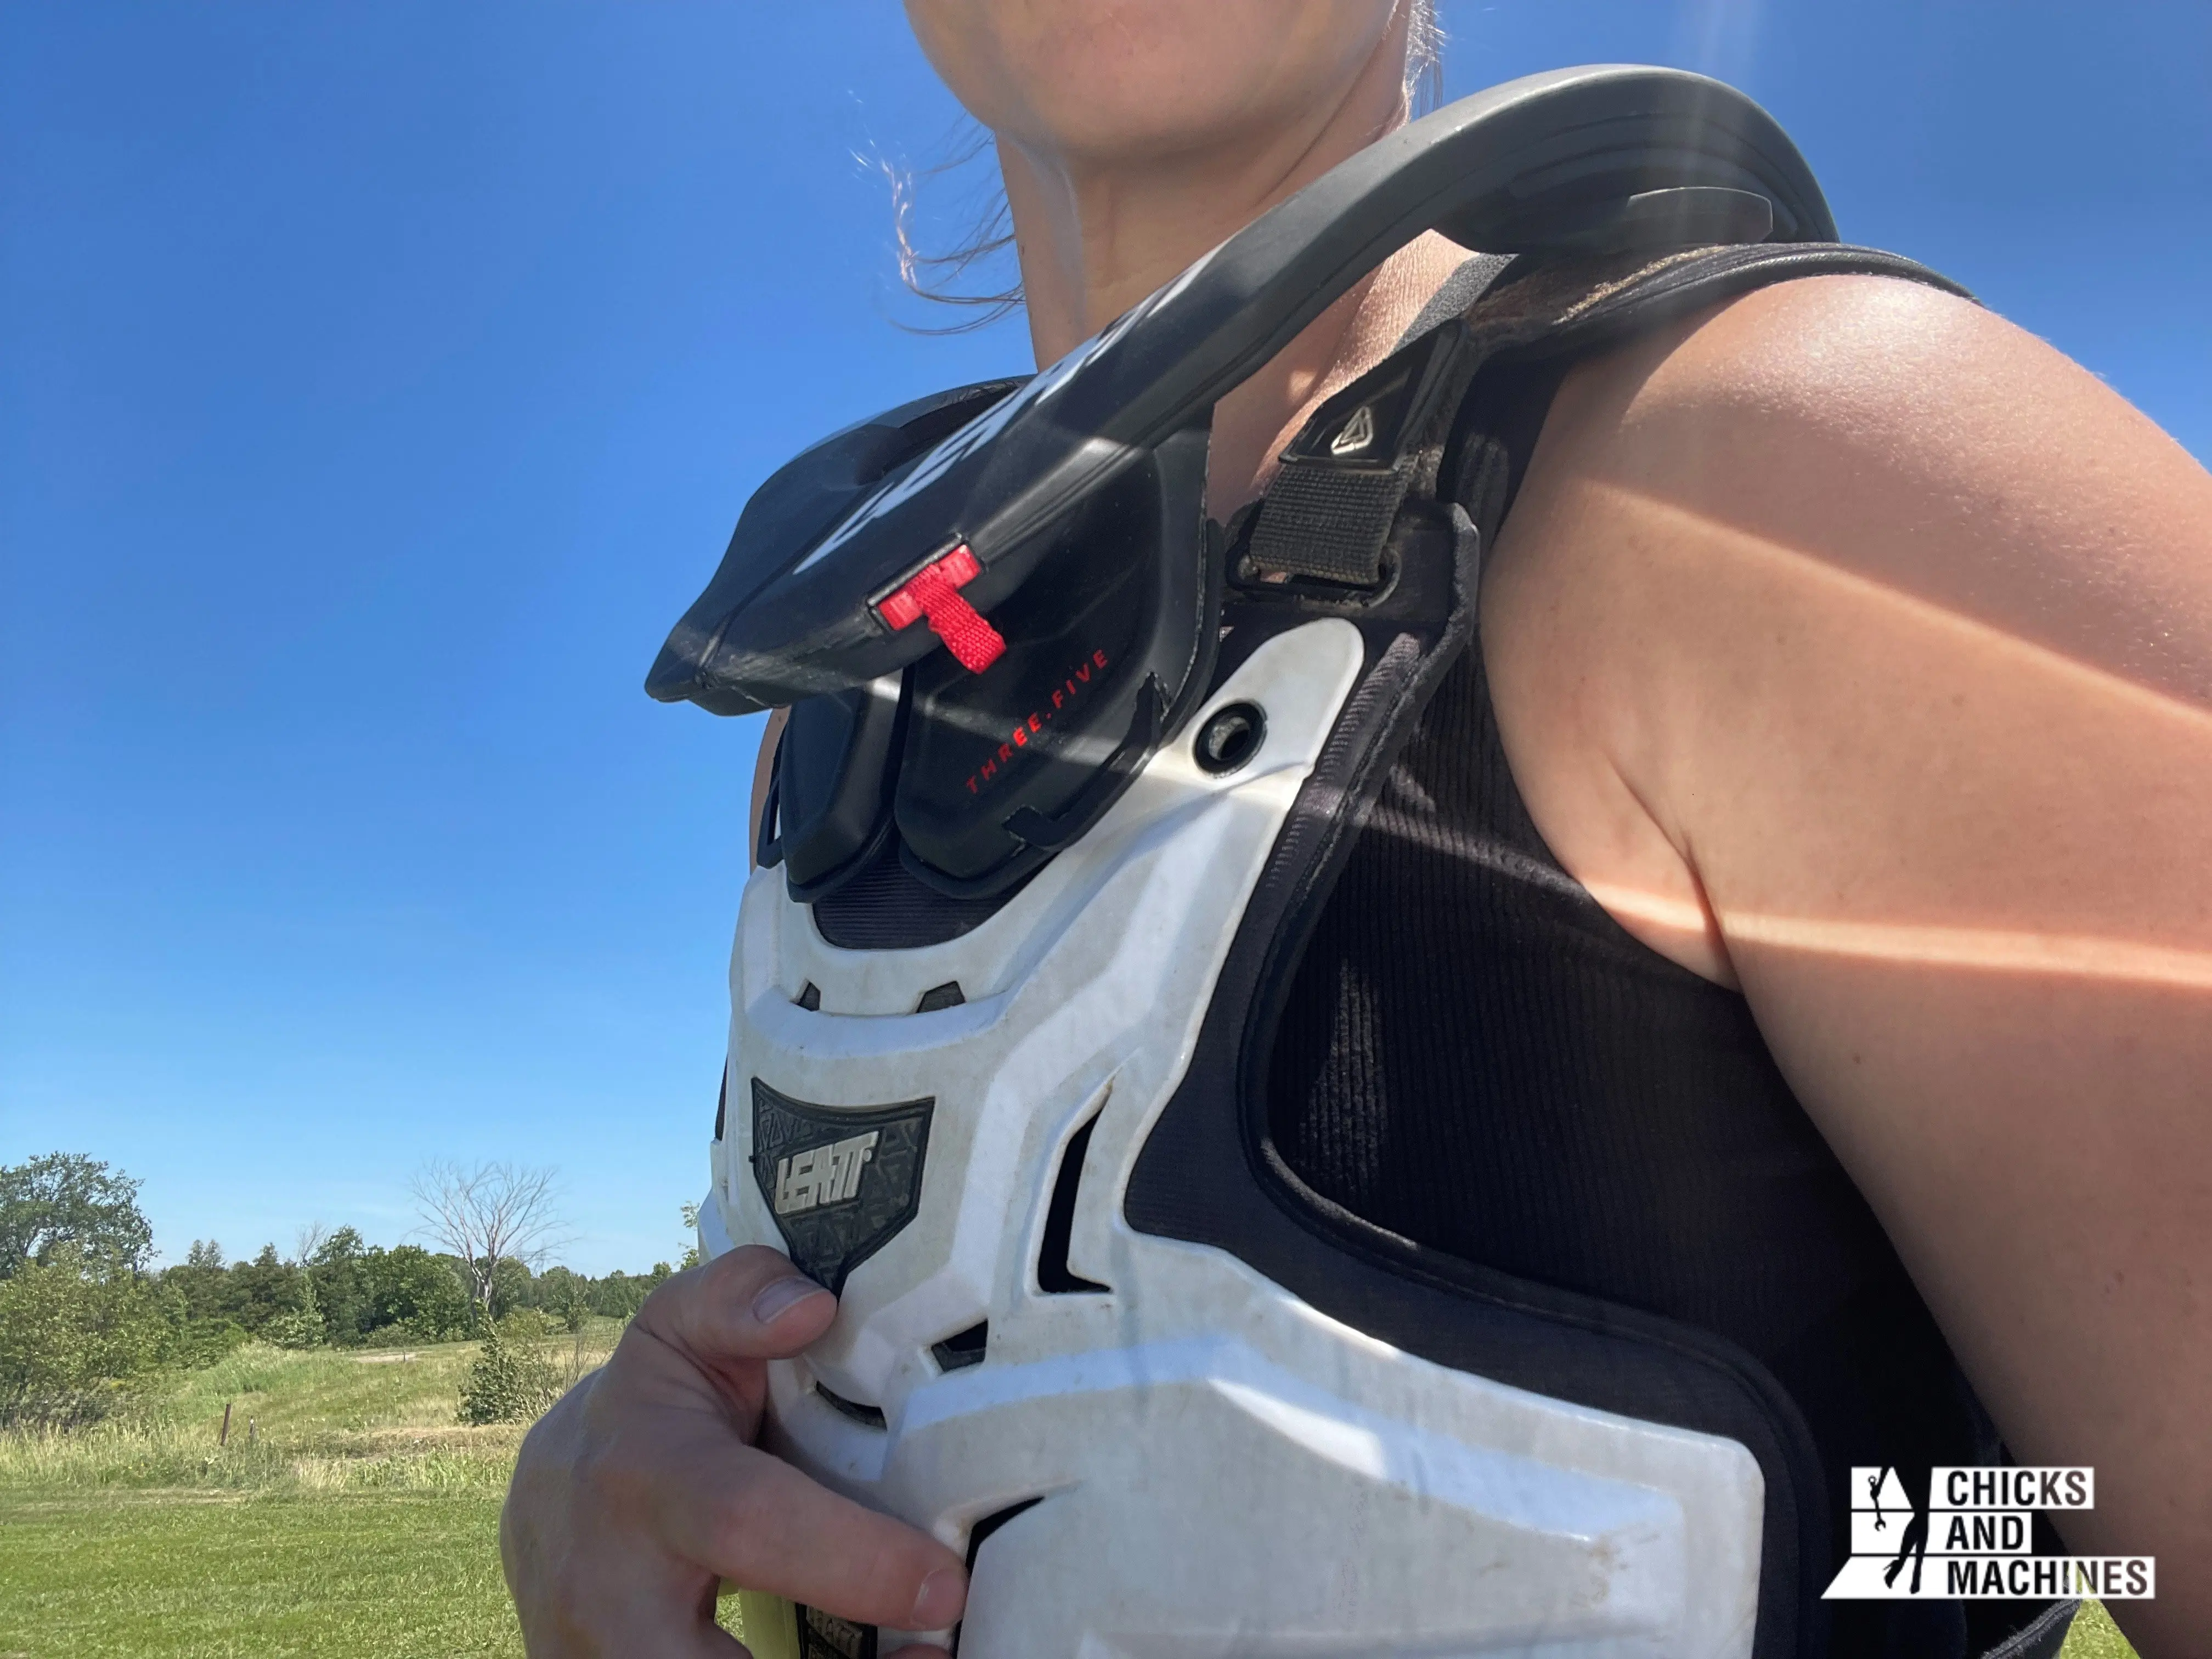 Cindy wearing the Leatt GPX 3.5 neck brace and the chest protector